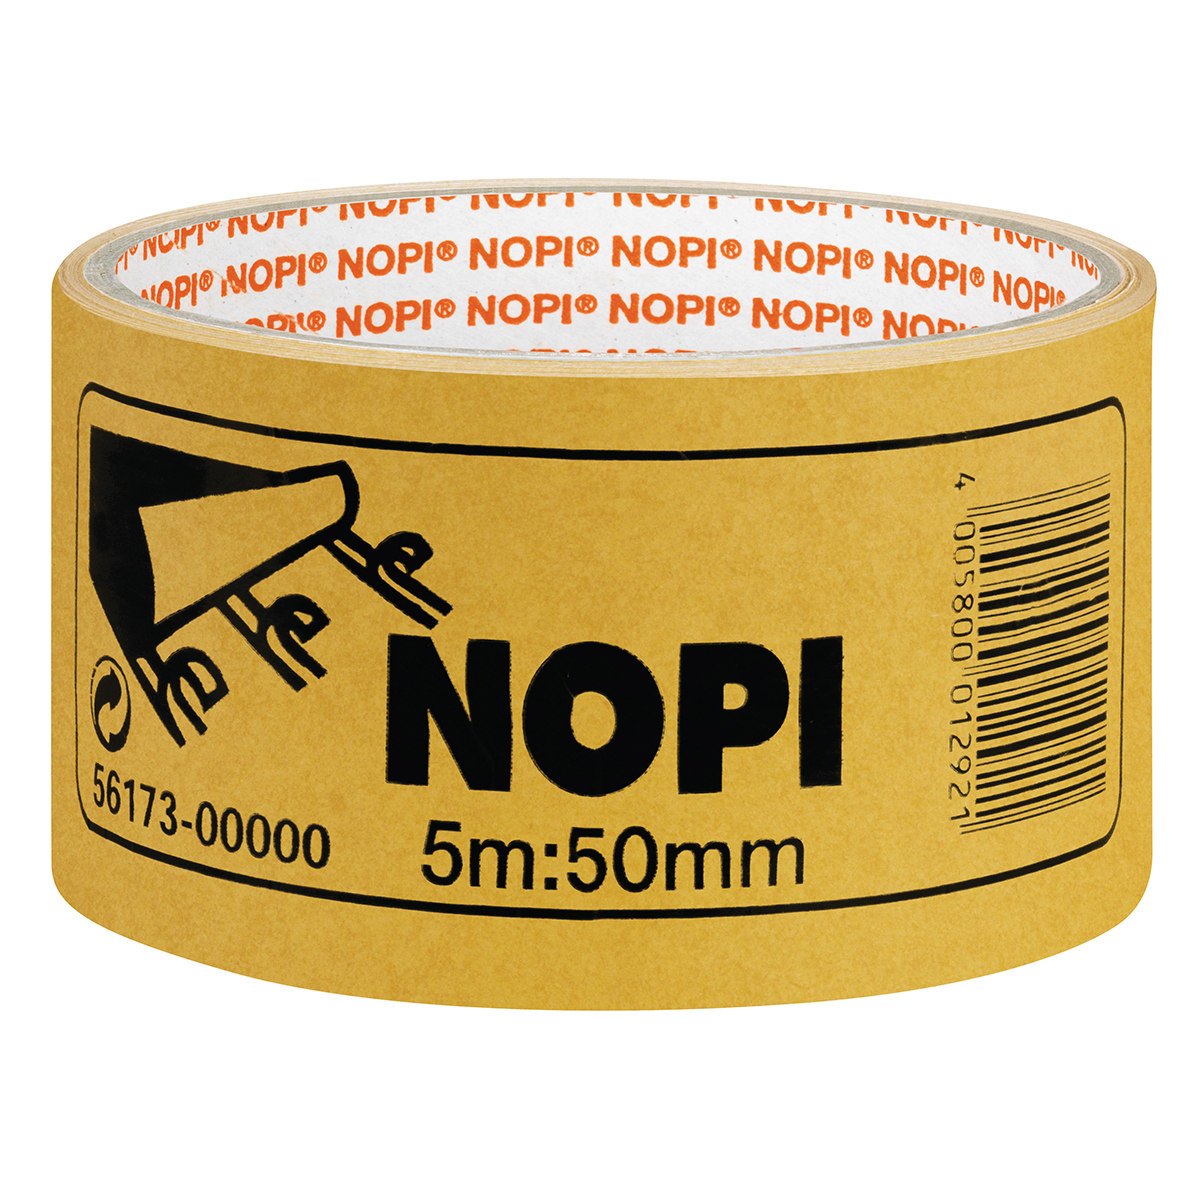 NOPI double-sided adhesive tape 50 mm x 5 m